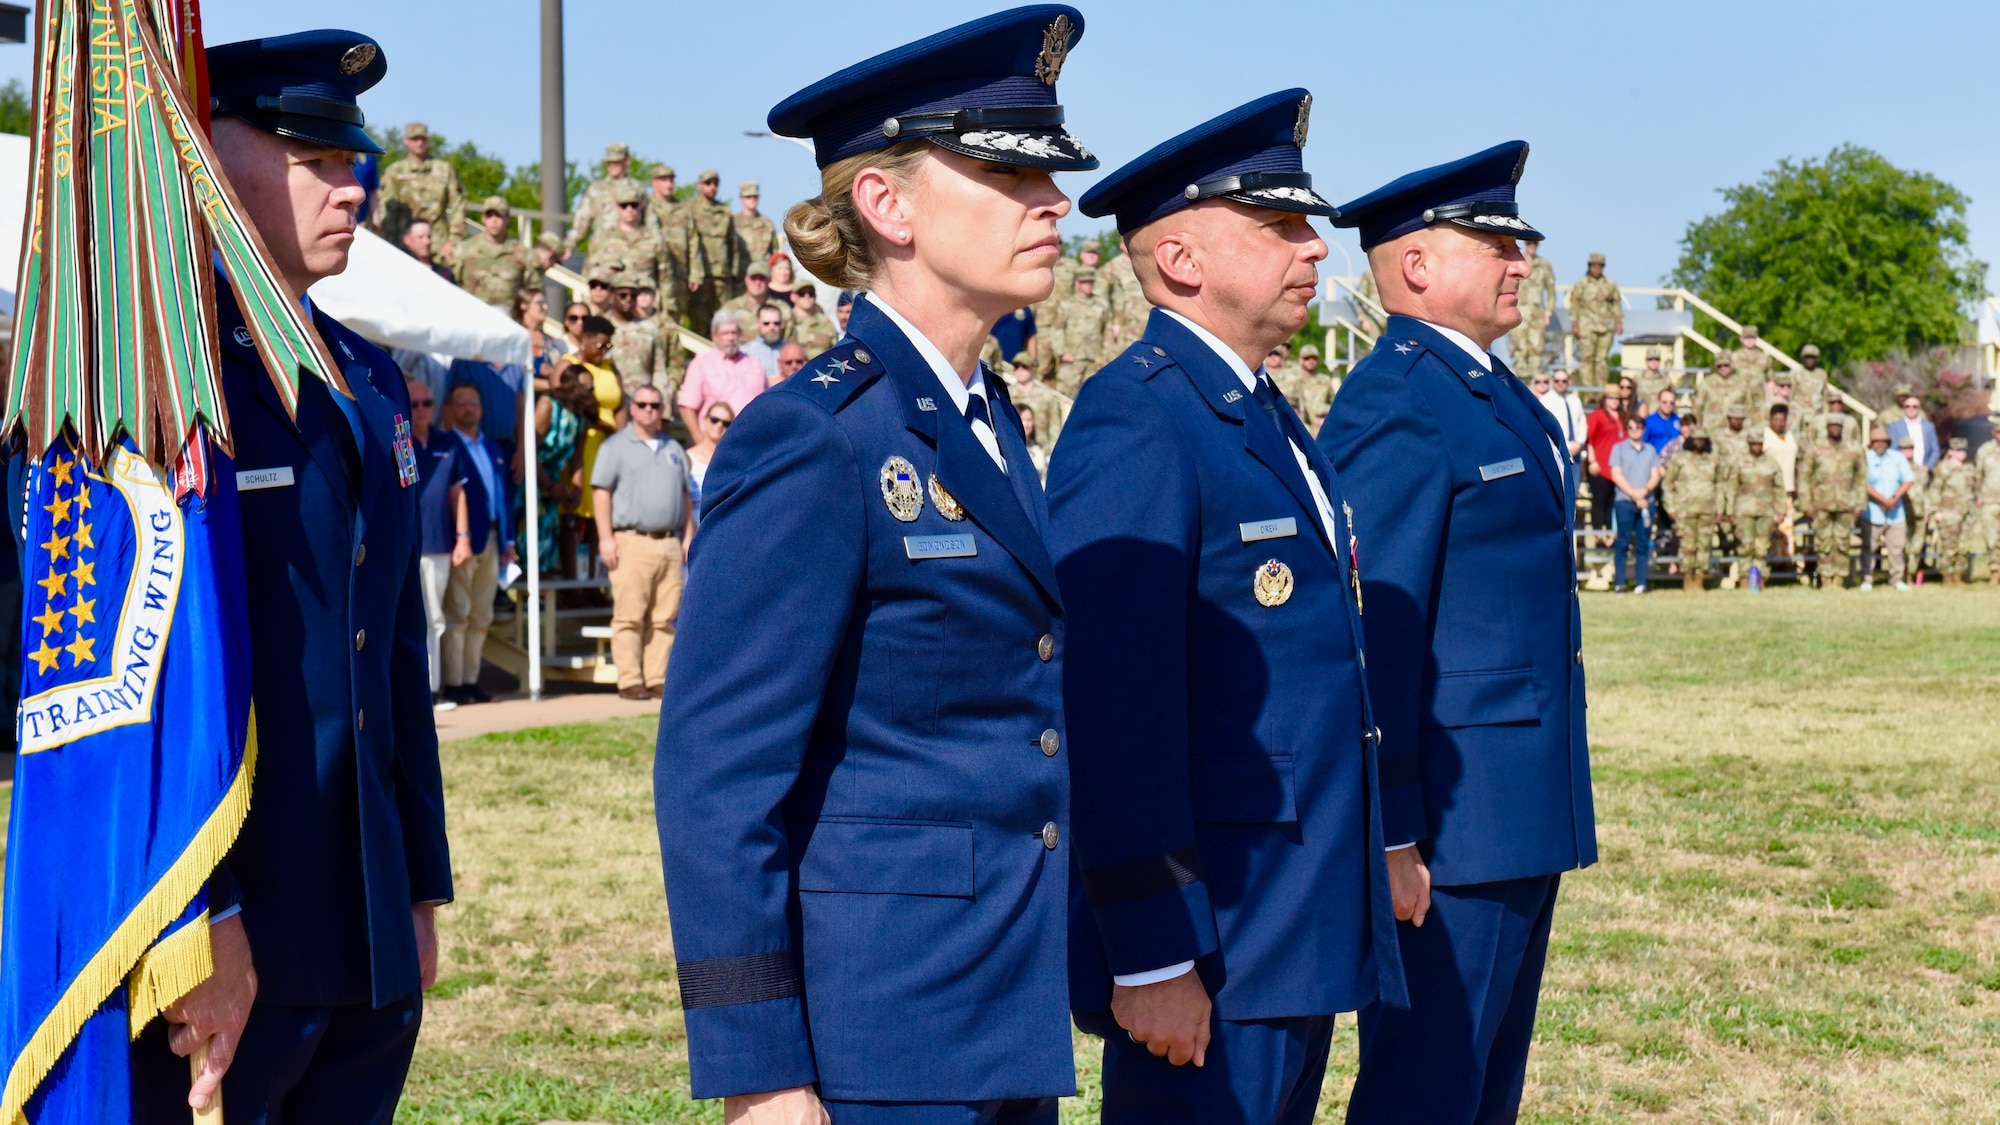 Maj. Gen. Michelle Edmondson, Second Air Force commander, Brig. Gen. George T.M. Dietrich III, 82nd Training Wing incoming commander, and Brig. Gen. Lyle Drew, 82nd TRW outgoing commander, stand at attention at the 82nd TRW Change of Command Ceremony at Sheppard Air Force Base, Texas, June 26, 2022.